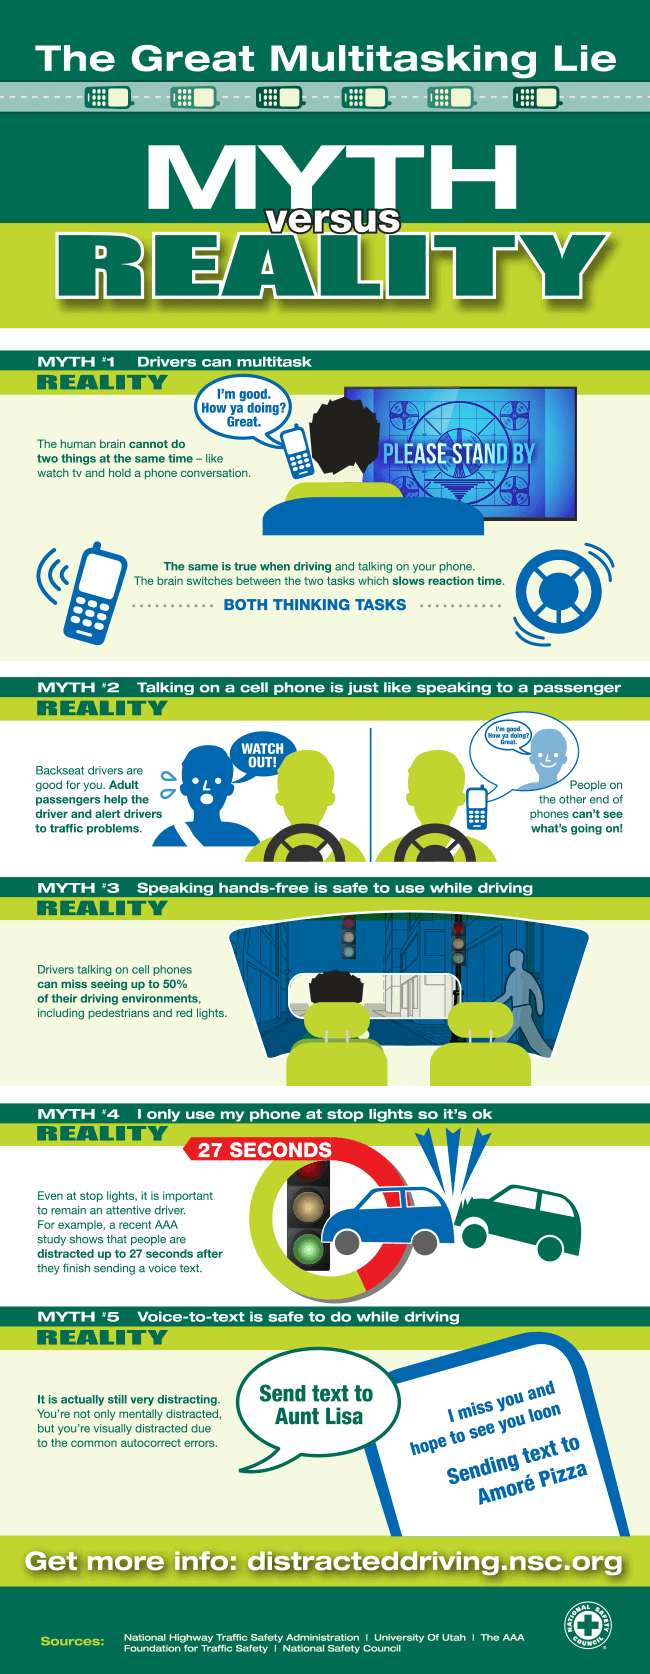 texting while driving risk vs undistracted